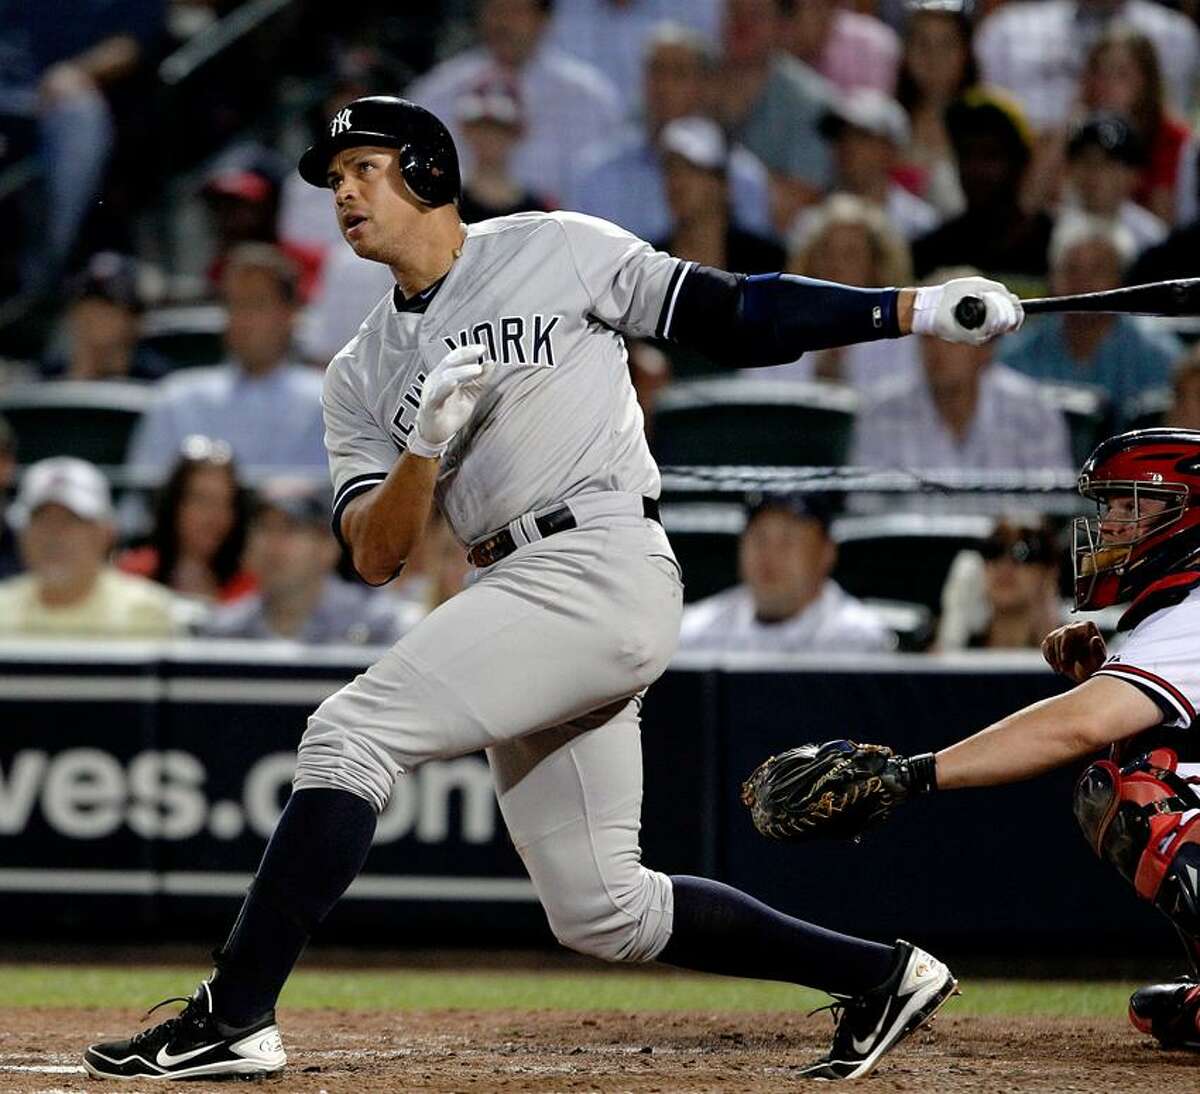 New York Yankees' Alex Rodriguez watches his grand slame in the eighth inning of a baseball game against the Atlanta Braves on Tuesday, June 12, 2012, in Atlanta. (AP Photo/David Goldman)